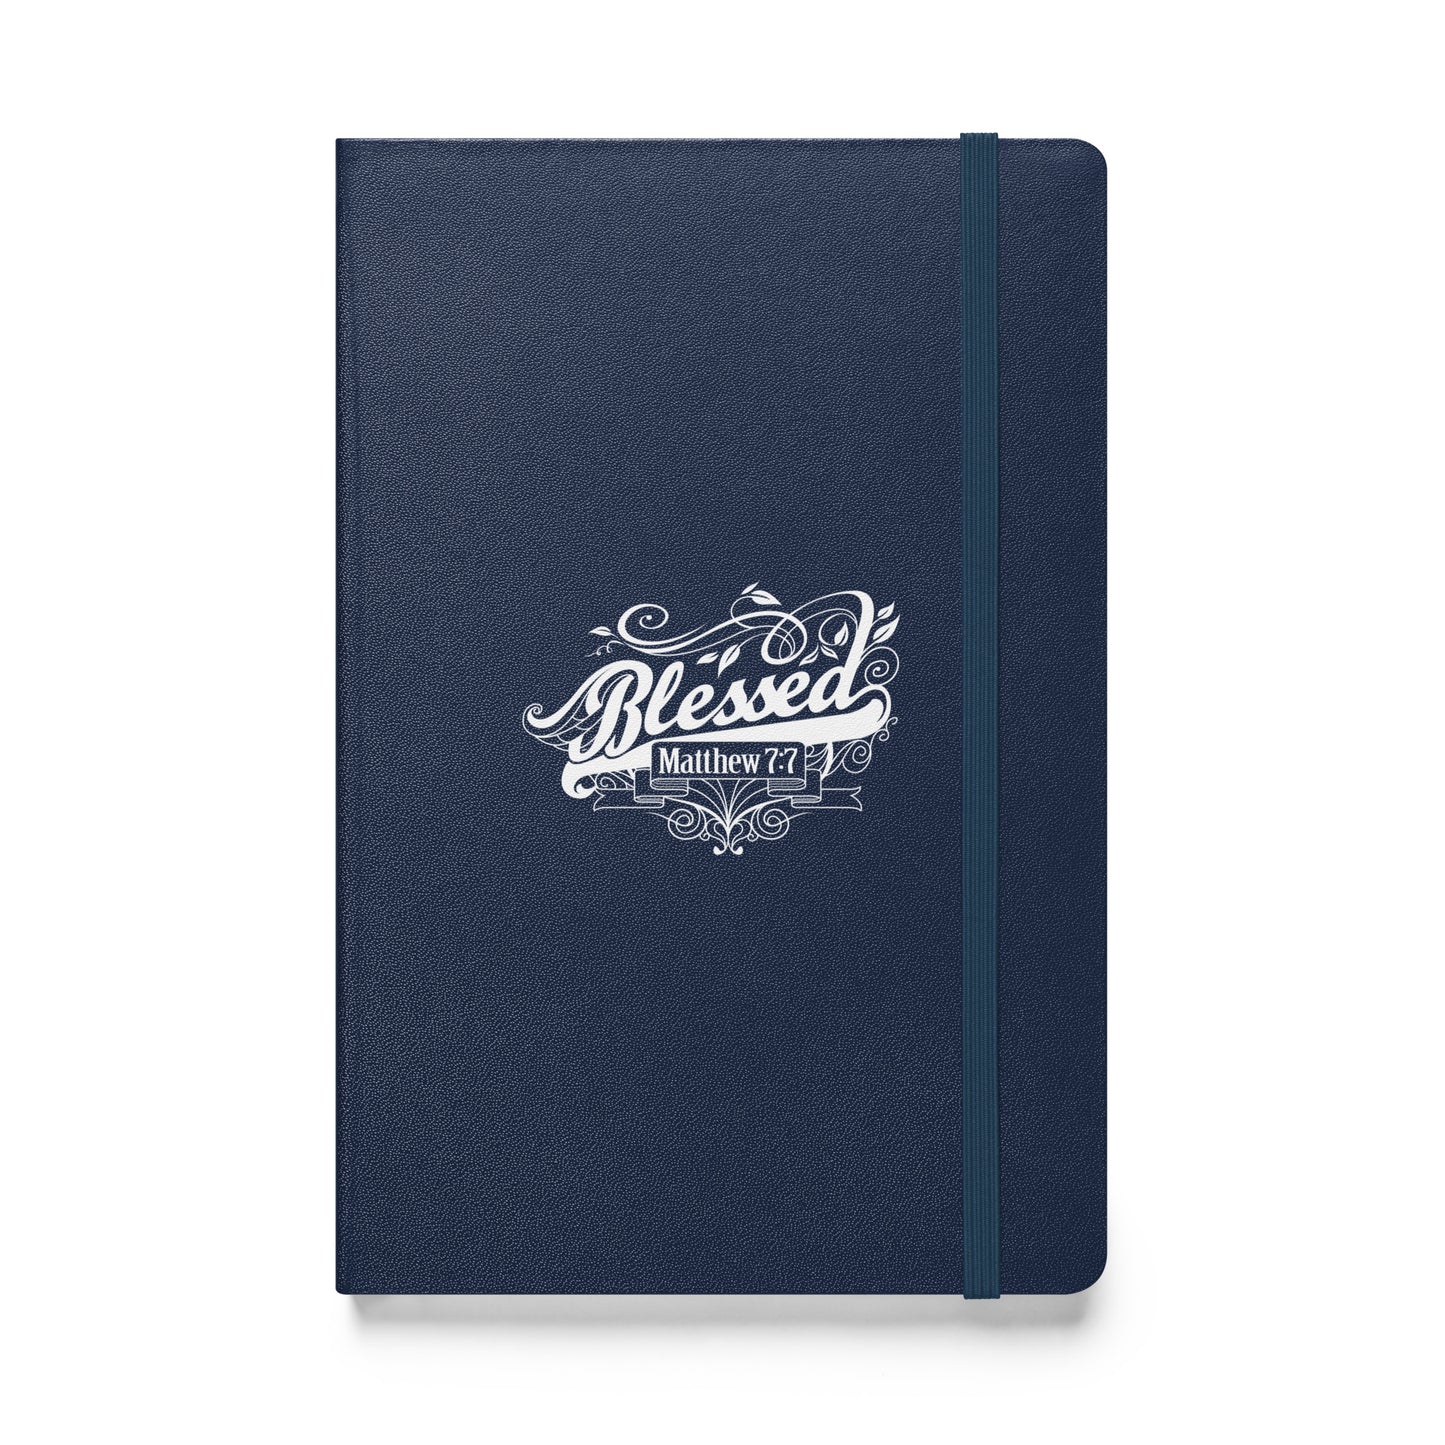 Blessed - Hardcover bound notebook - View All Colors